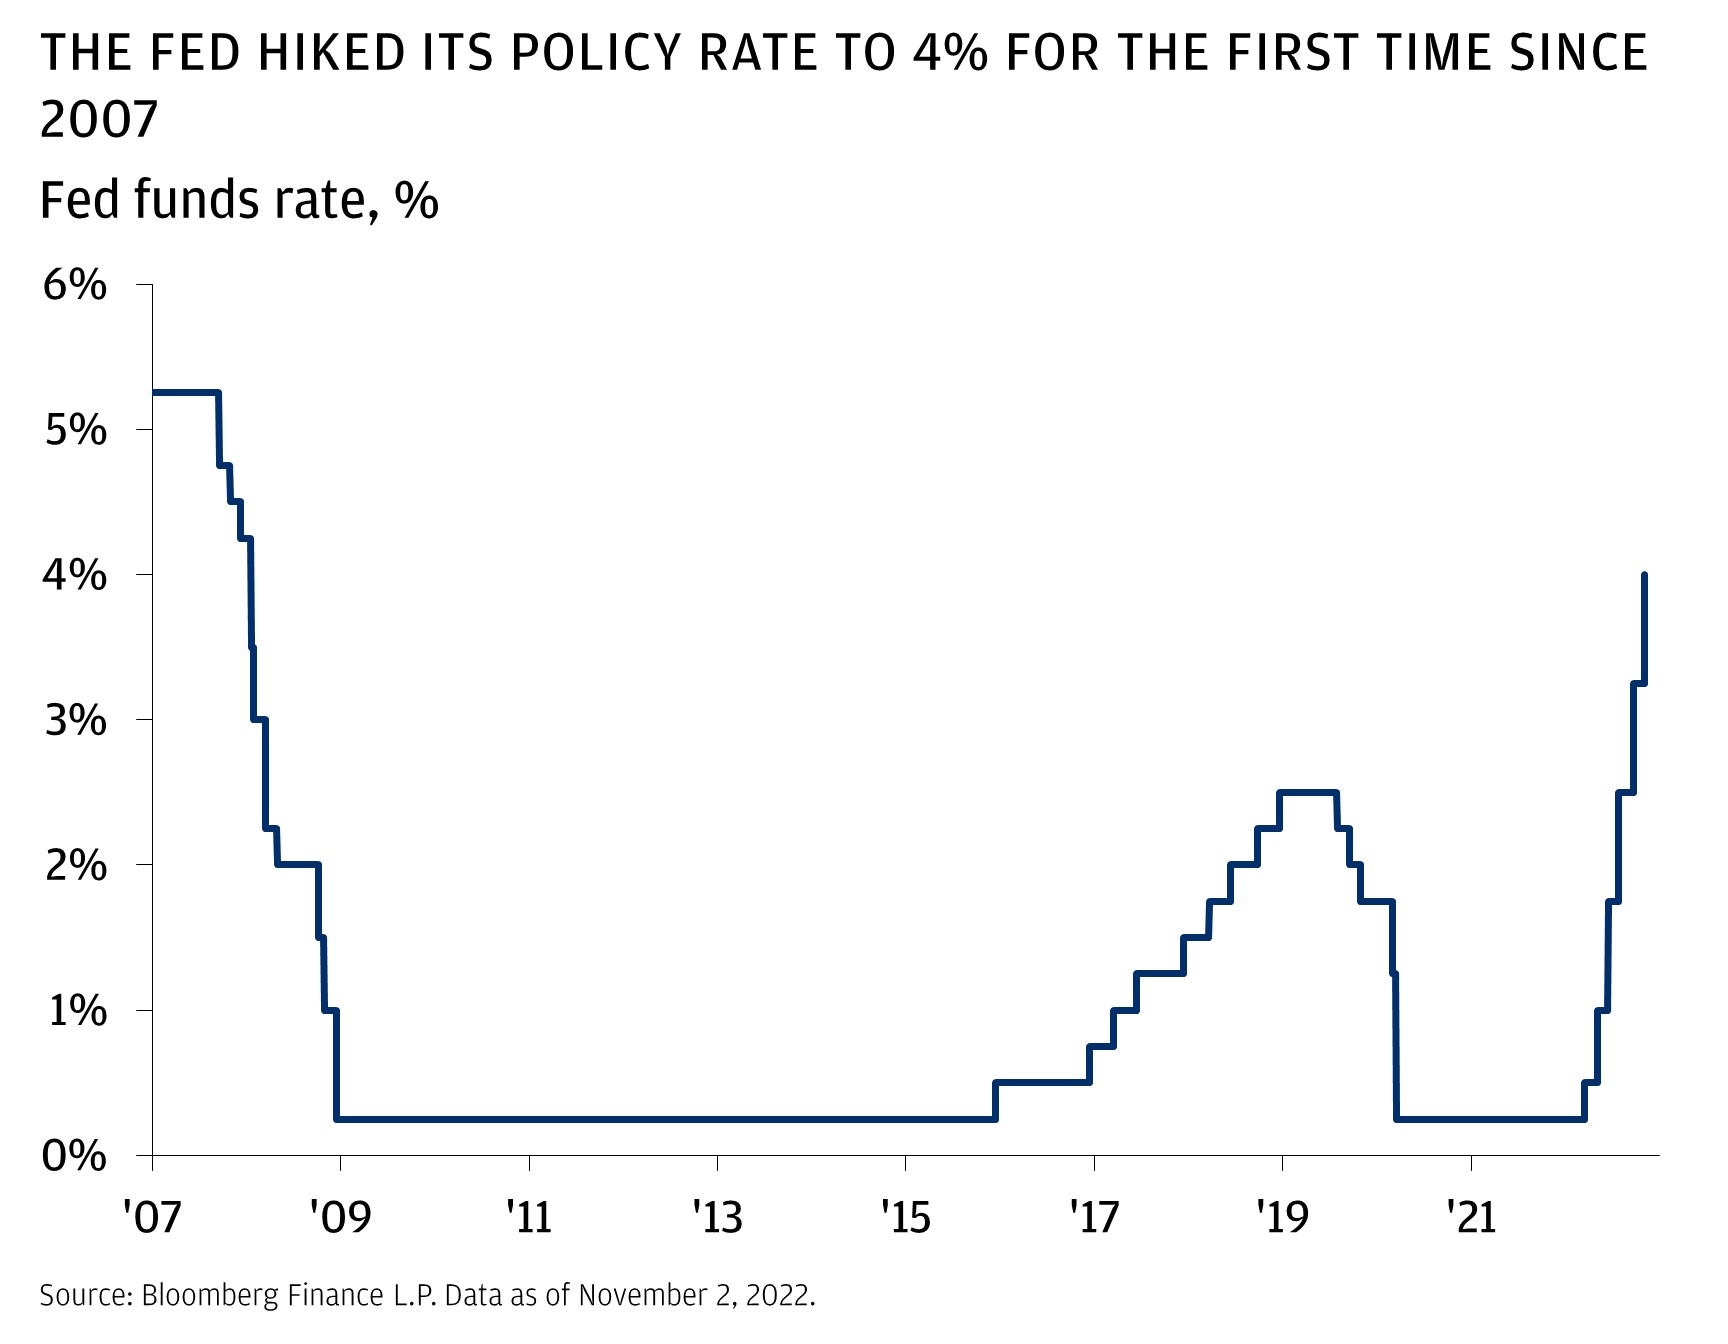 This chart shows the fed funds rate from 2007 to November 2022.